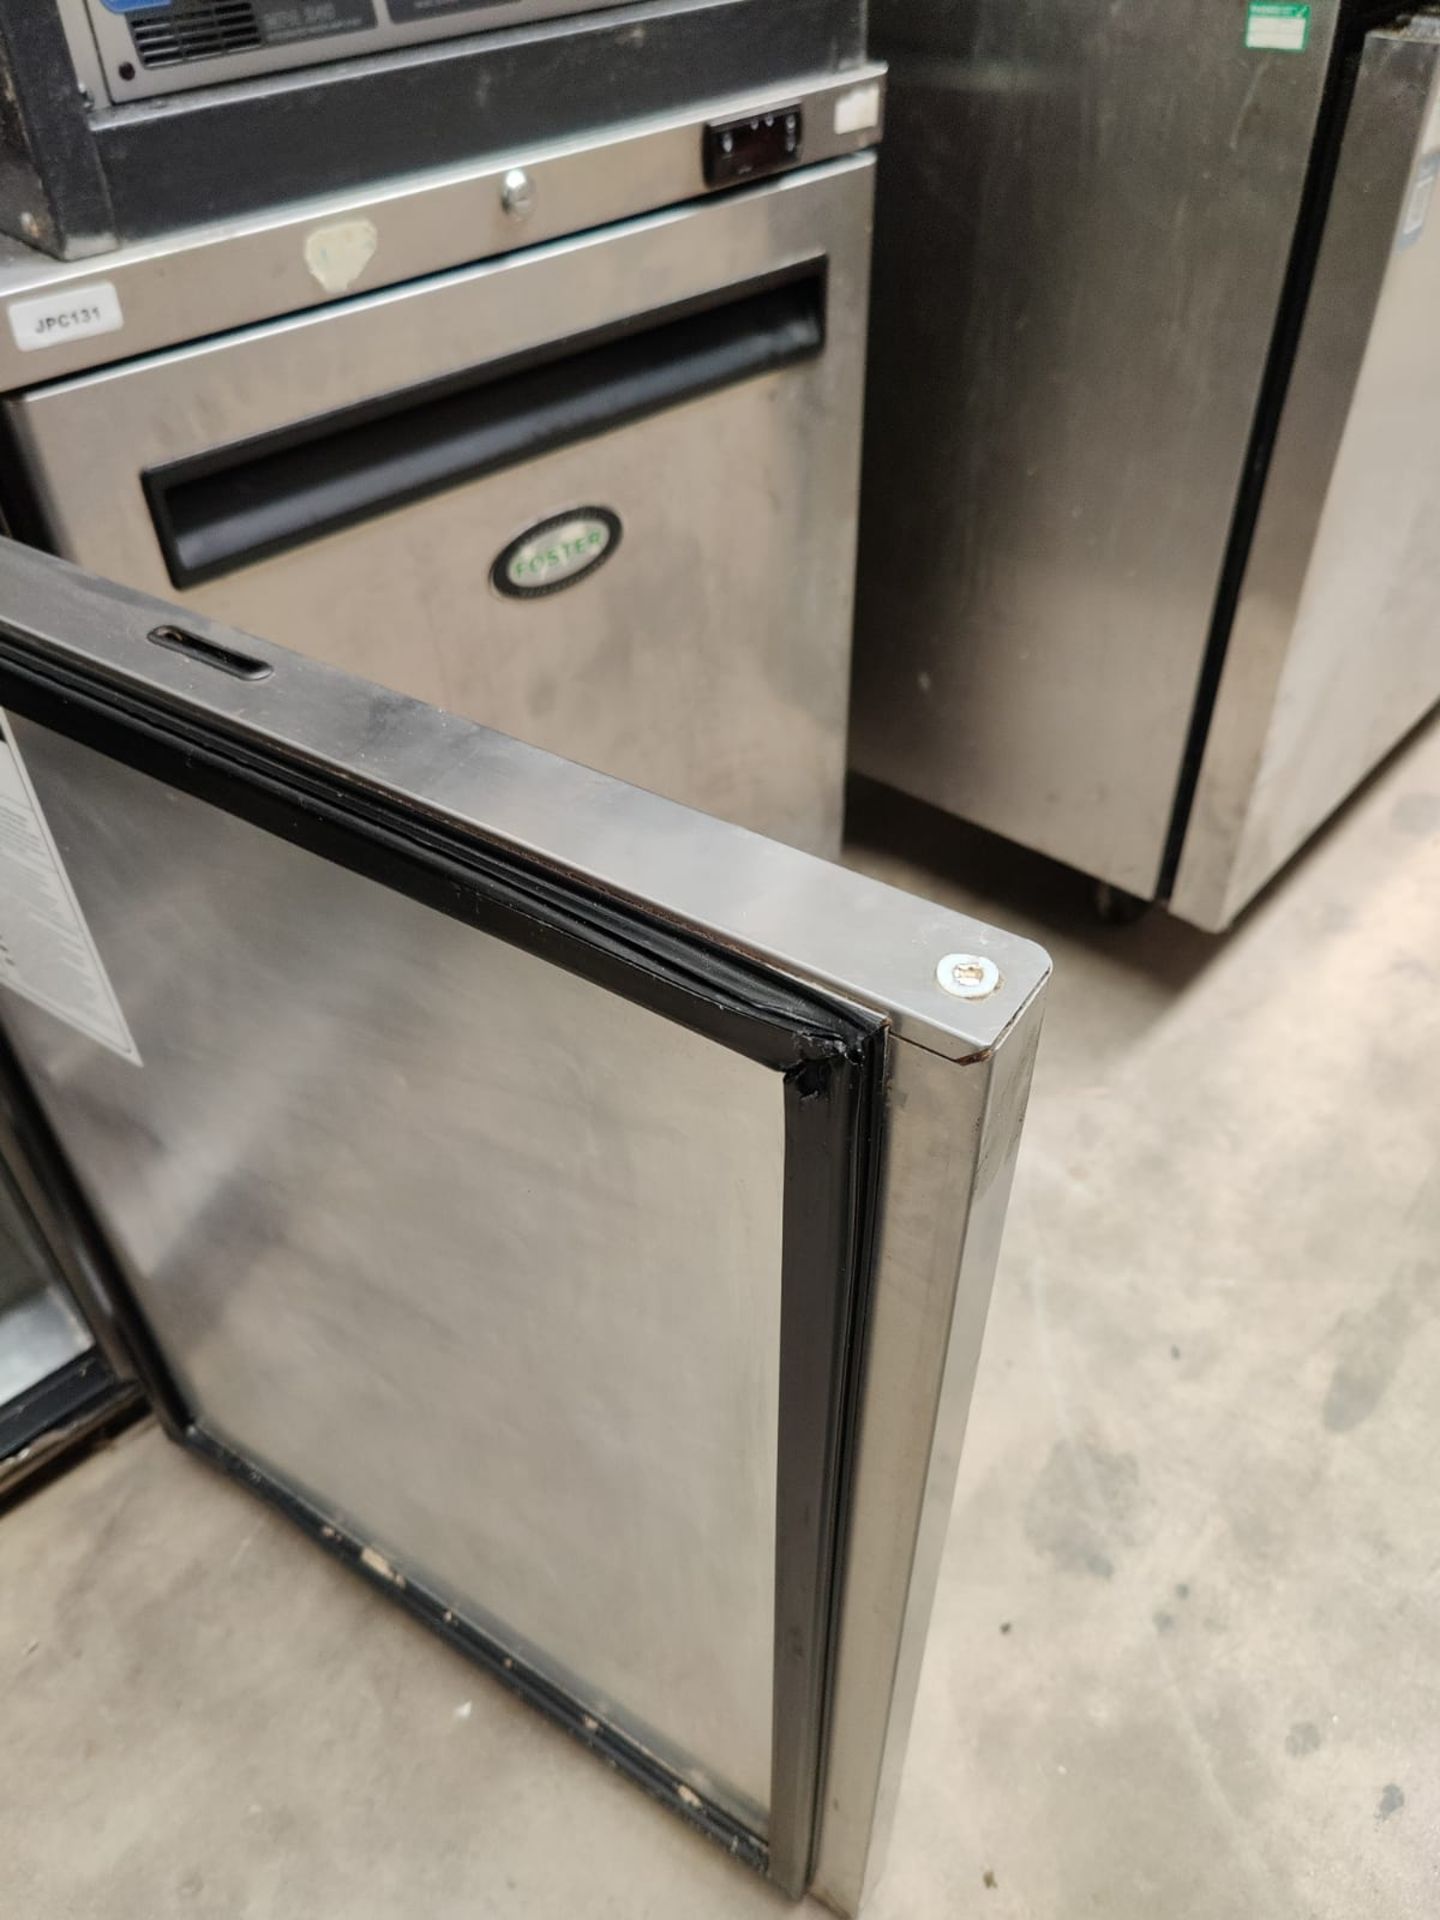 1 x Fosters Undercounter Freezer - Model LR150 - Stainless Steel Exterior - Image 3 of 4